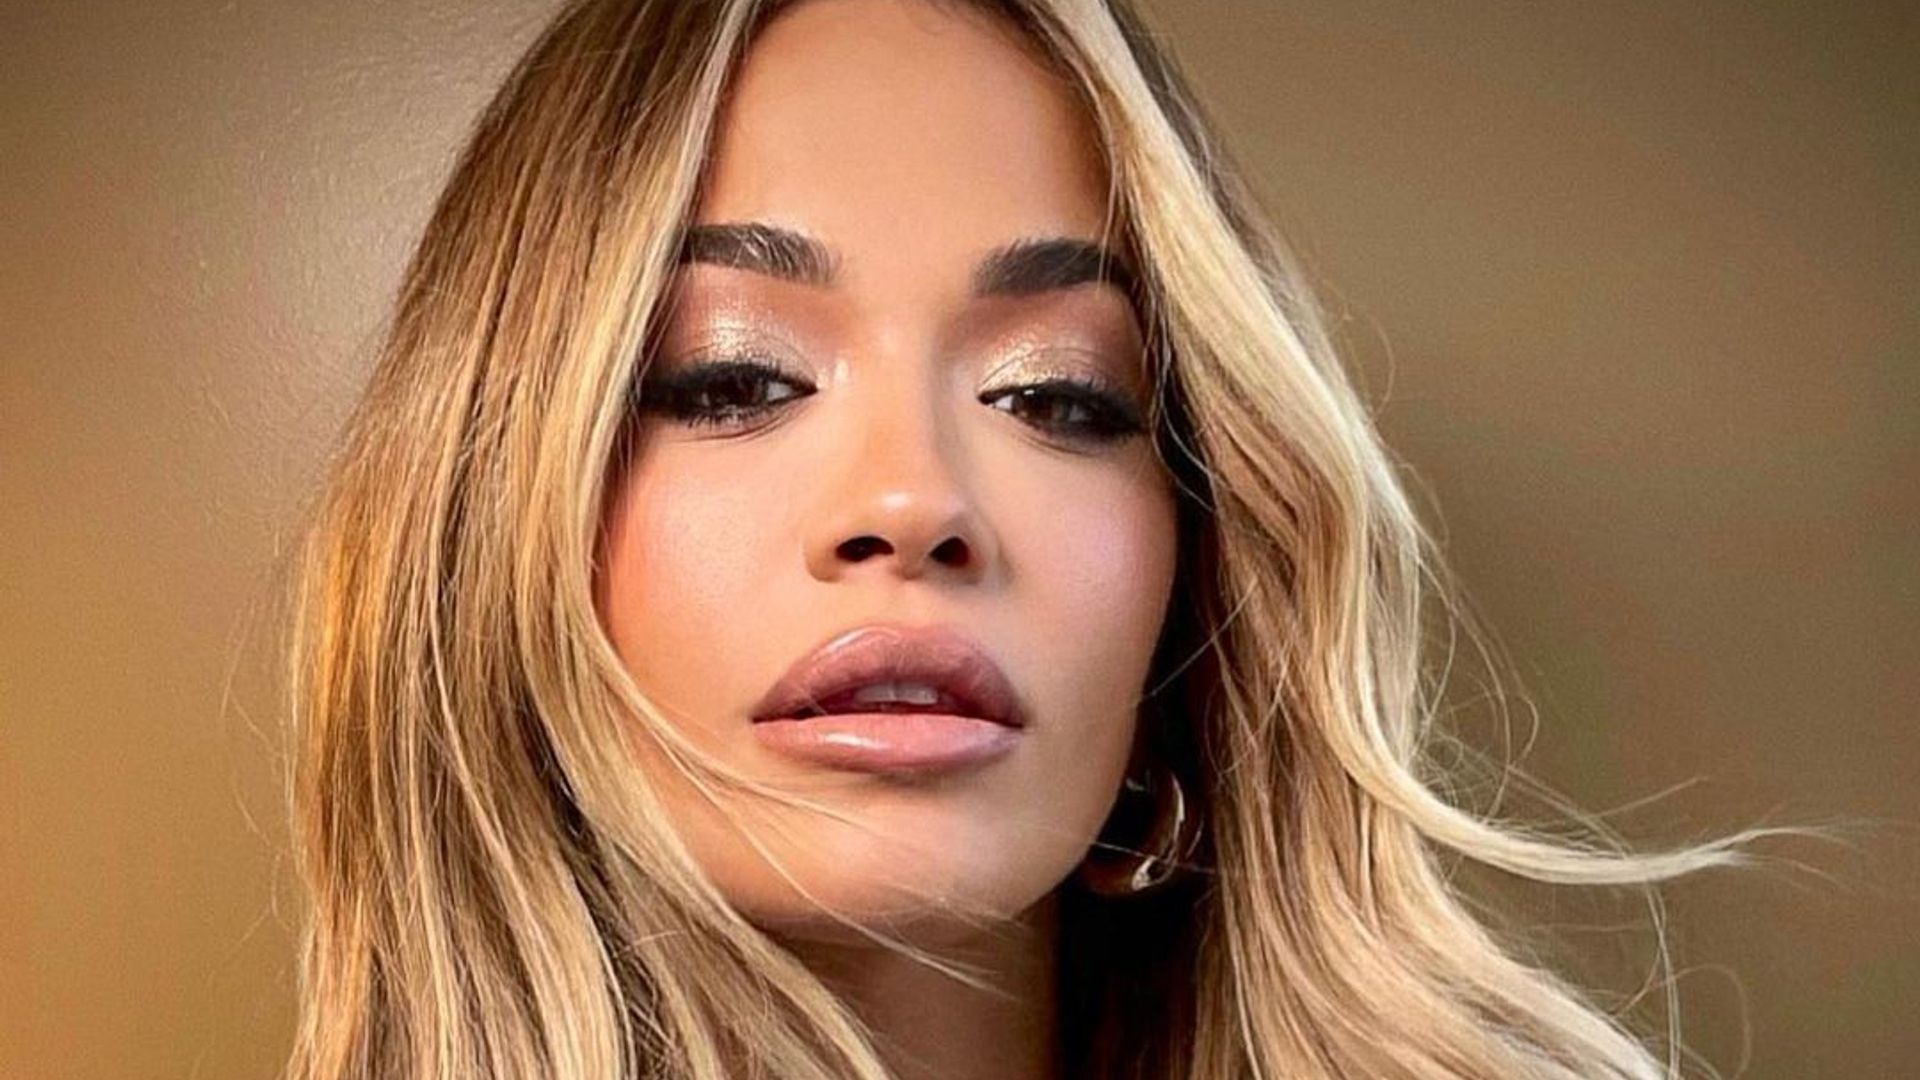 Rita Ora is a known lover of glitter makeup look